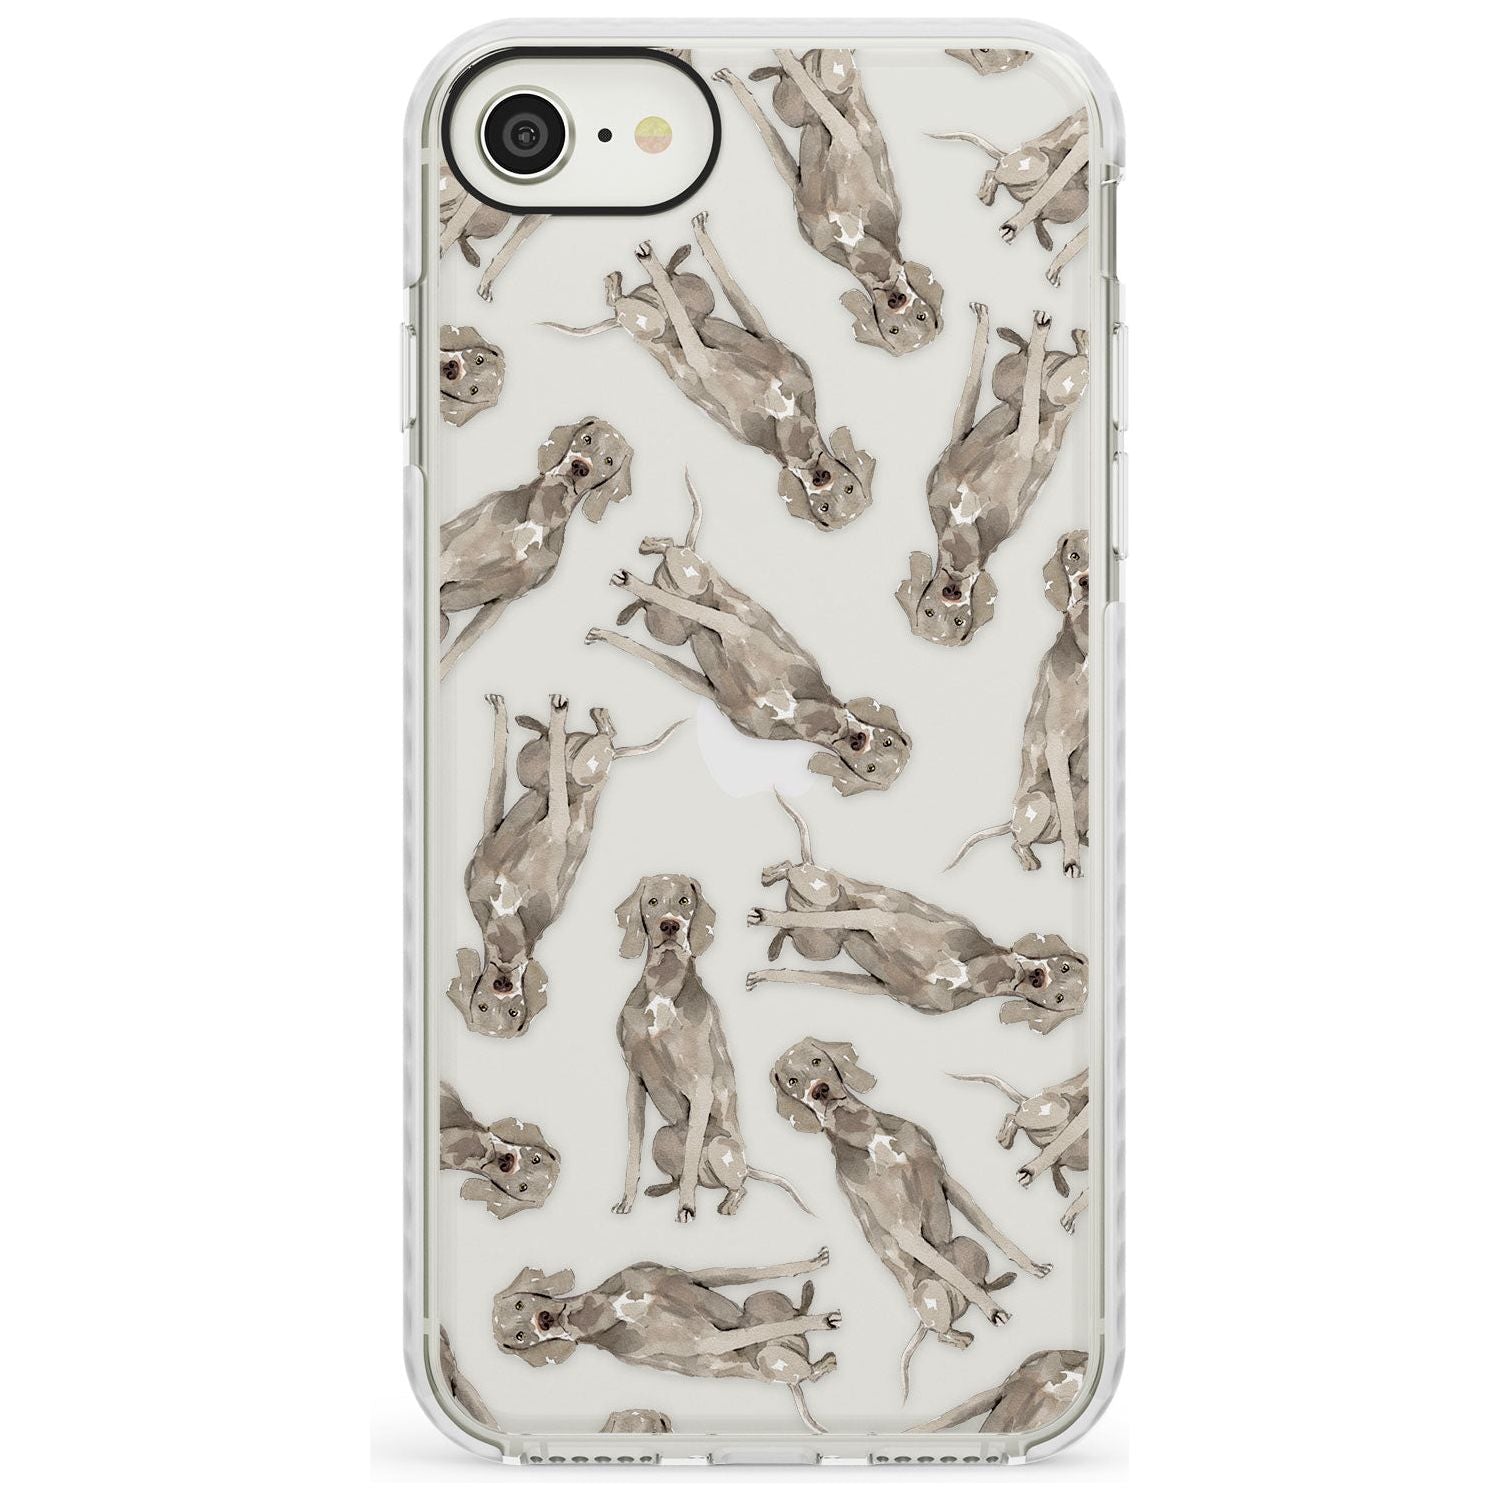 Weimaraner Watercolour Dog Pattern Impact Phone Case for iPhone SE 8 7 Plus